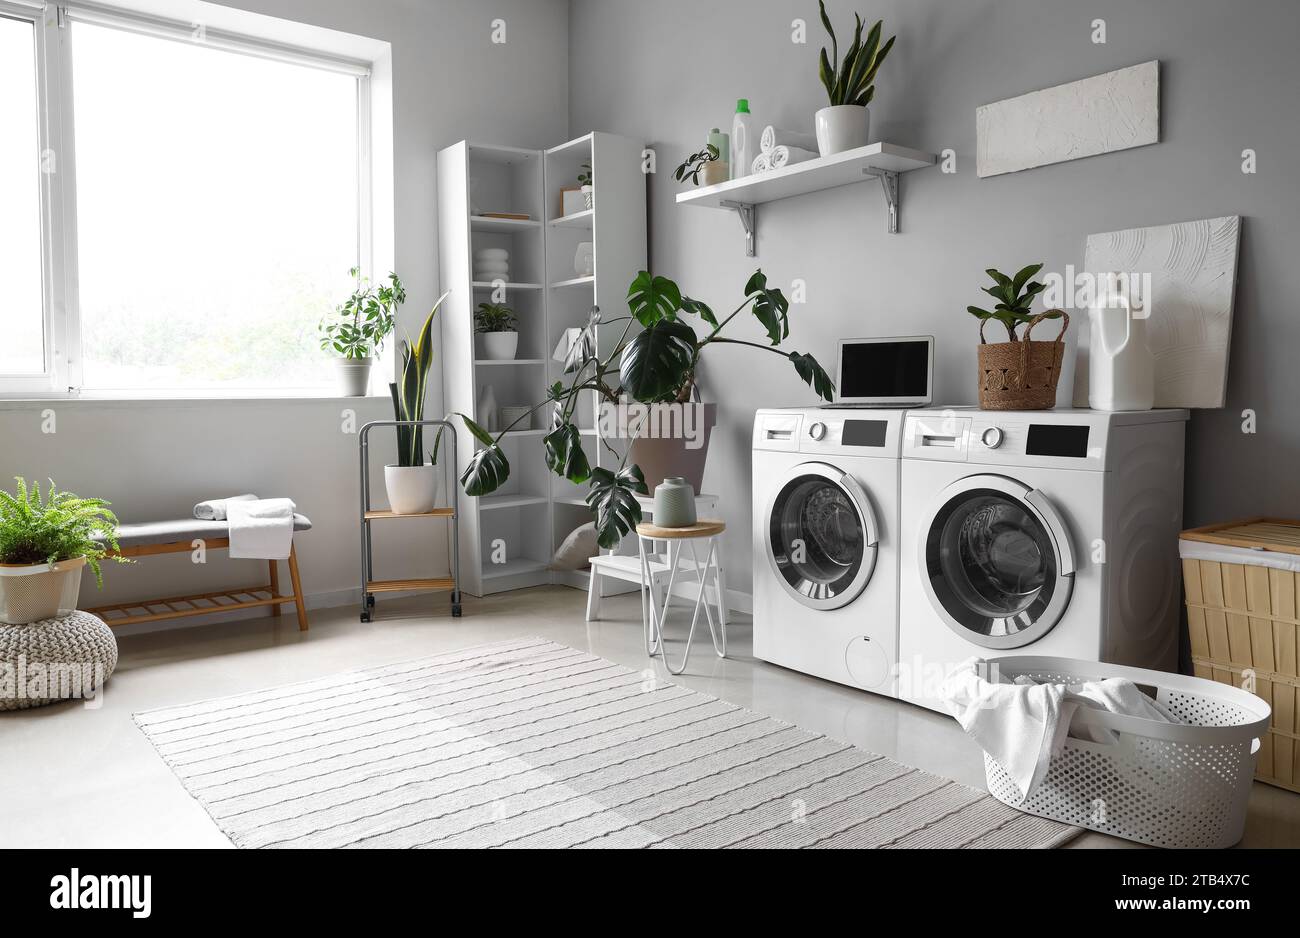 Interior of laundry room with washing machines, houseplants and laptop Stock Photo